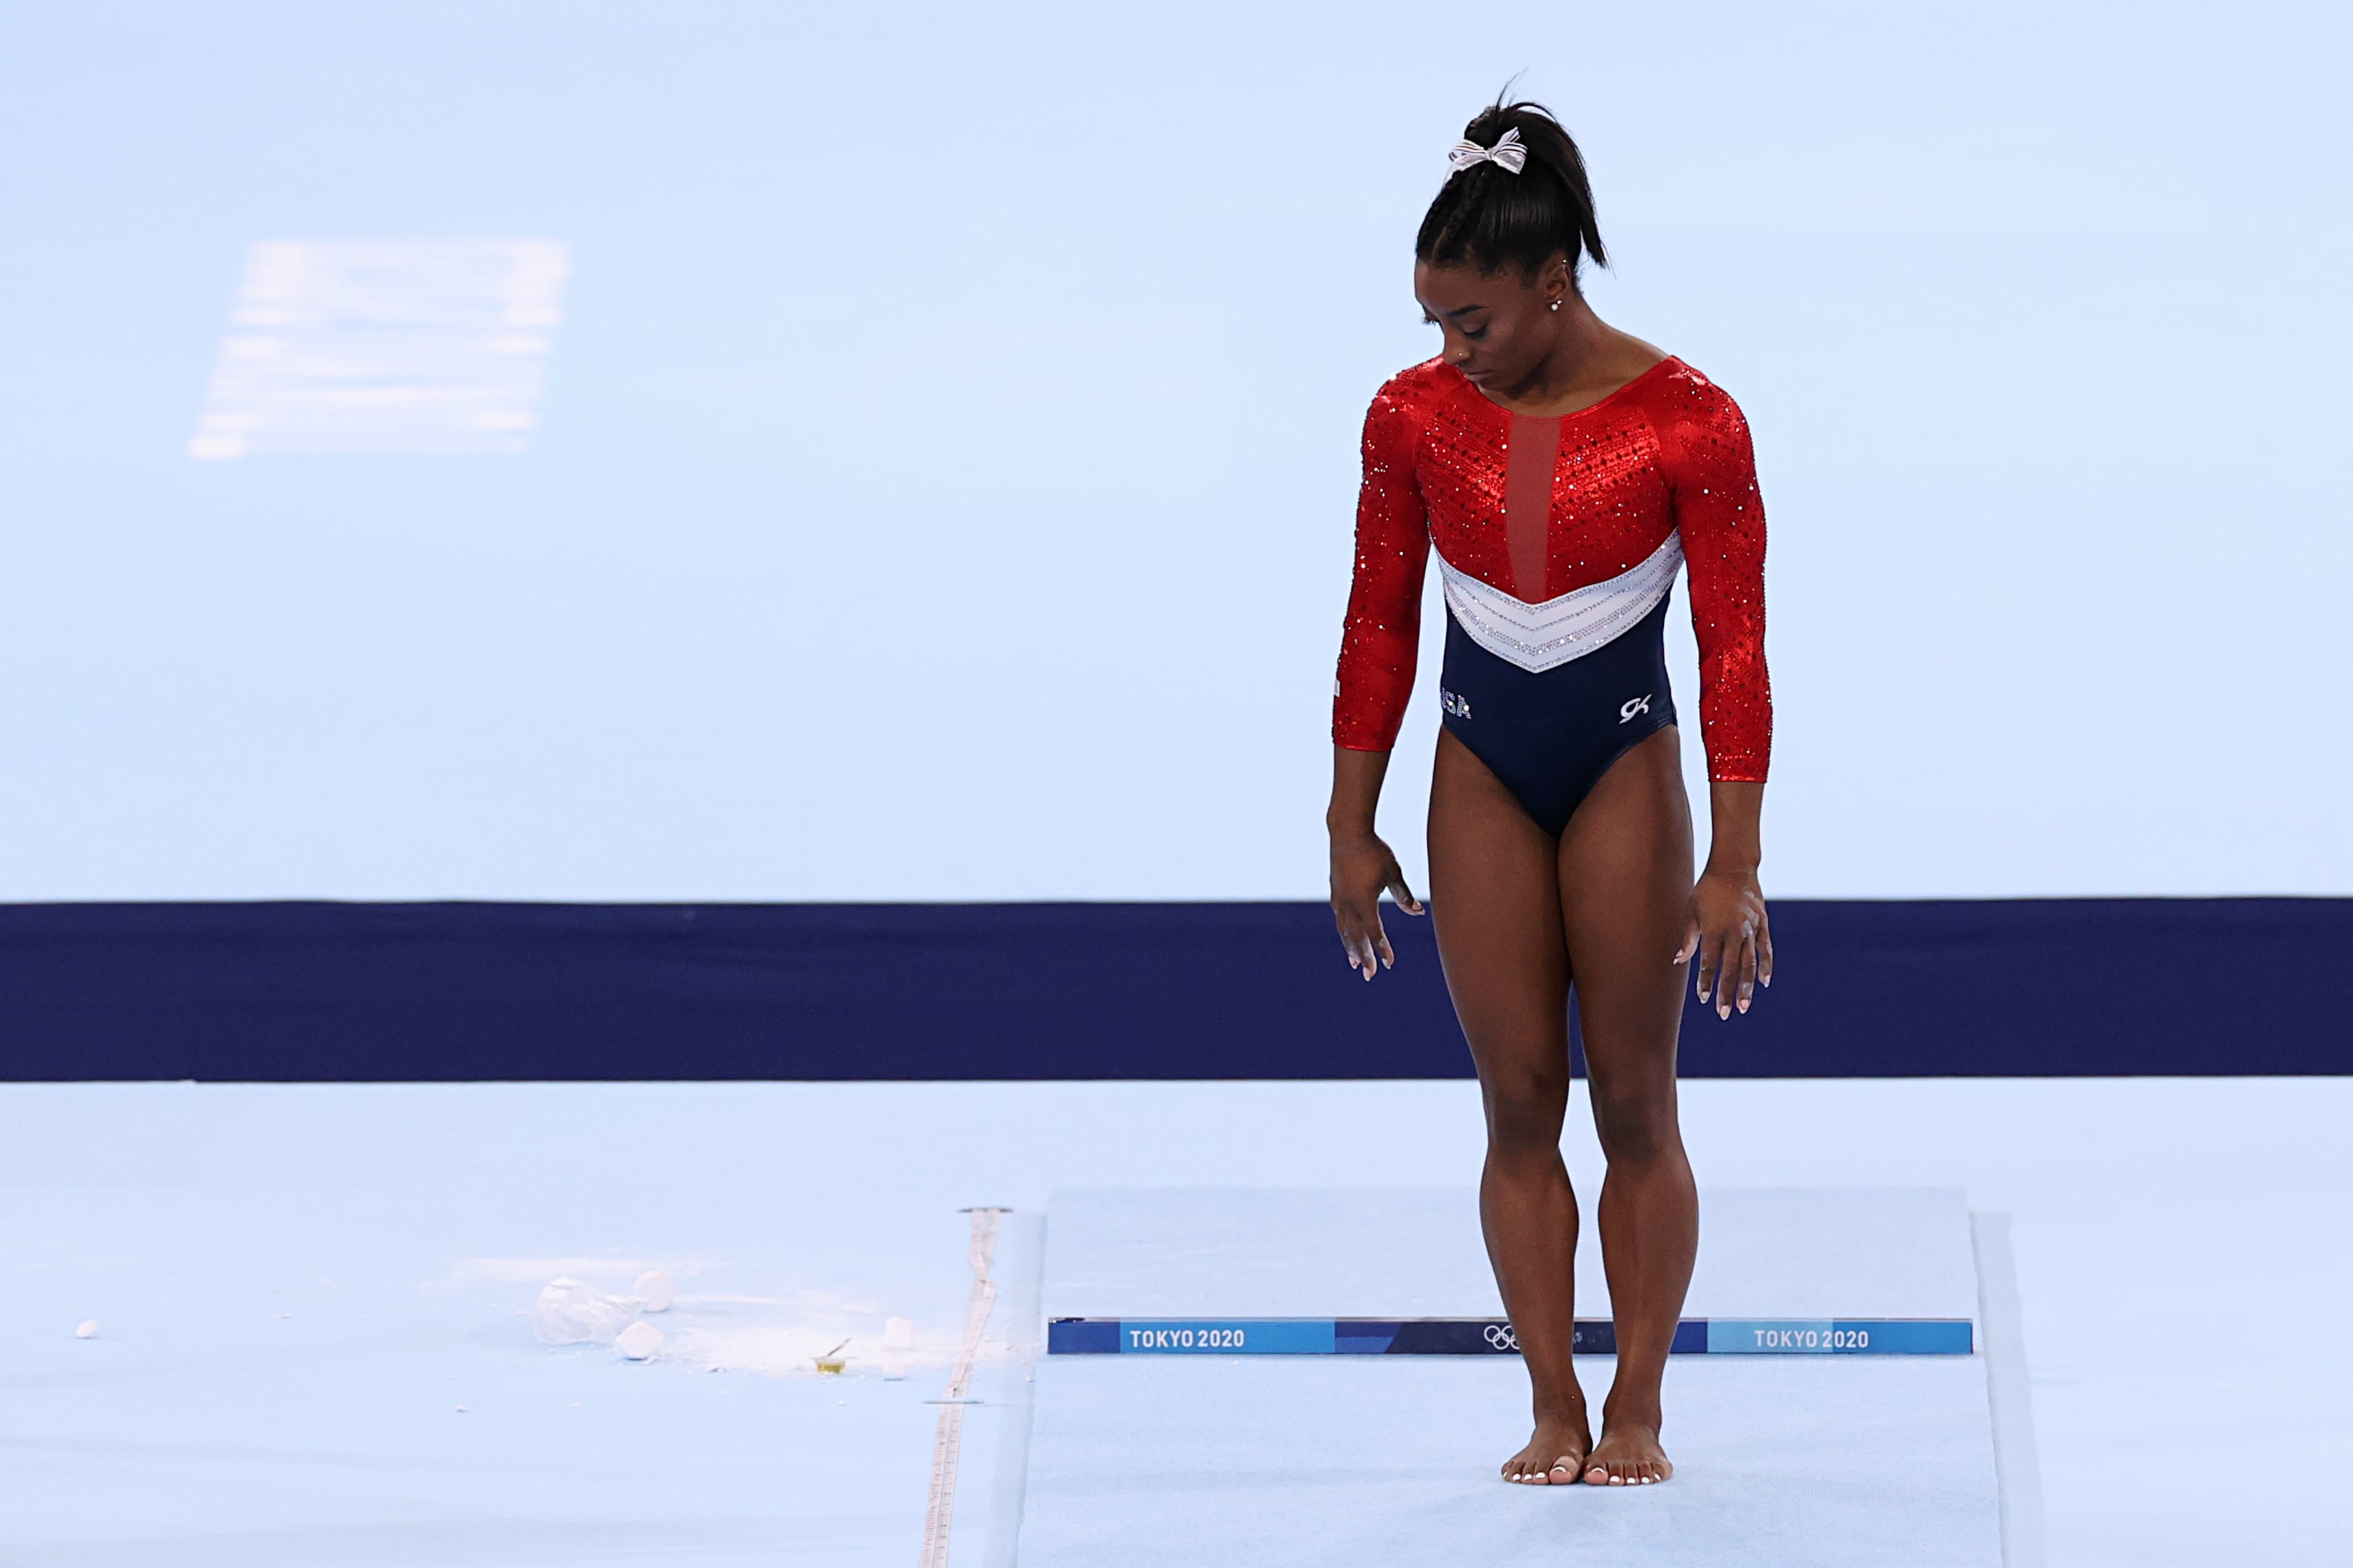 Women's Gymnastics Final: Simone Biles Says She Wasn't in Right Place  Mentally During Olympic Final - The New York Times